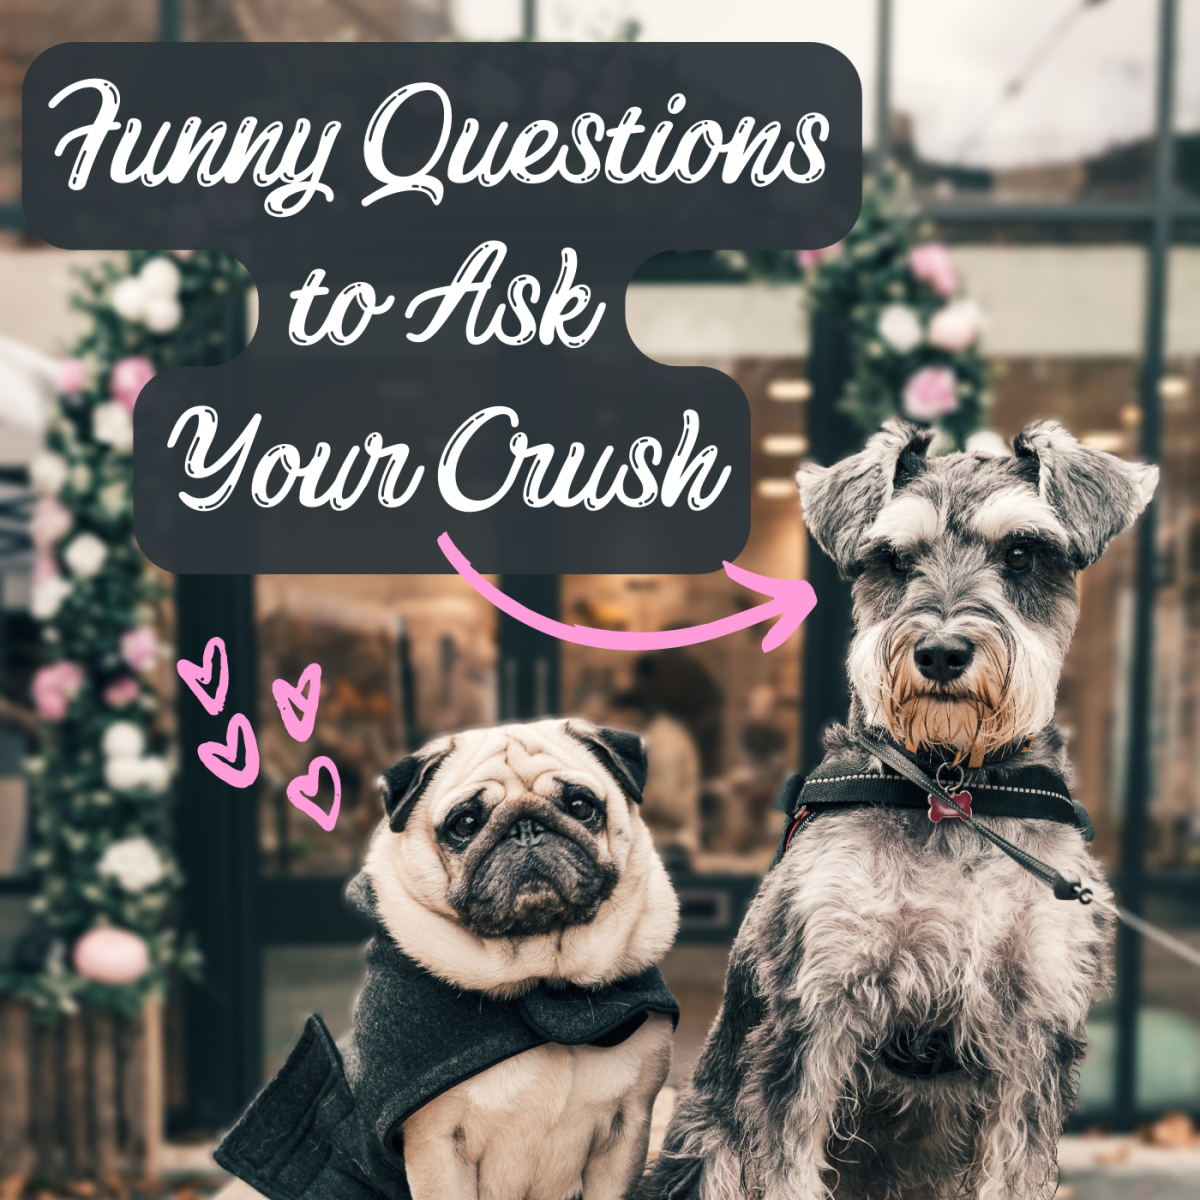 Do you feel tongue-tied around your crush?! Prepare to have a fun conversation with these witty questions!